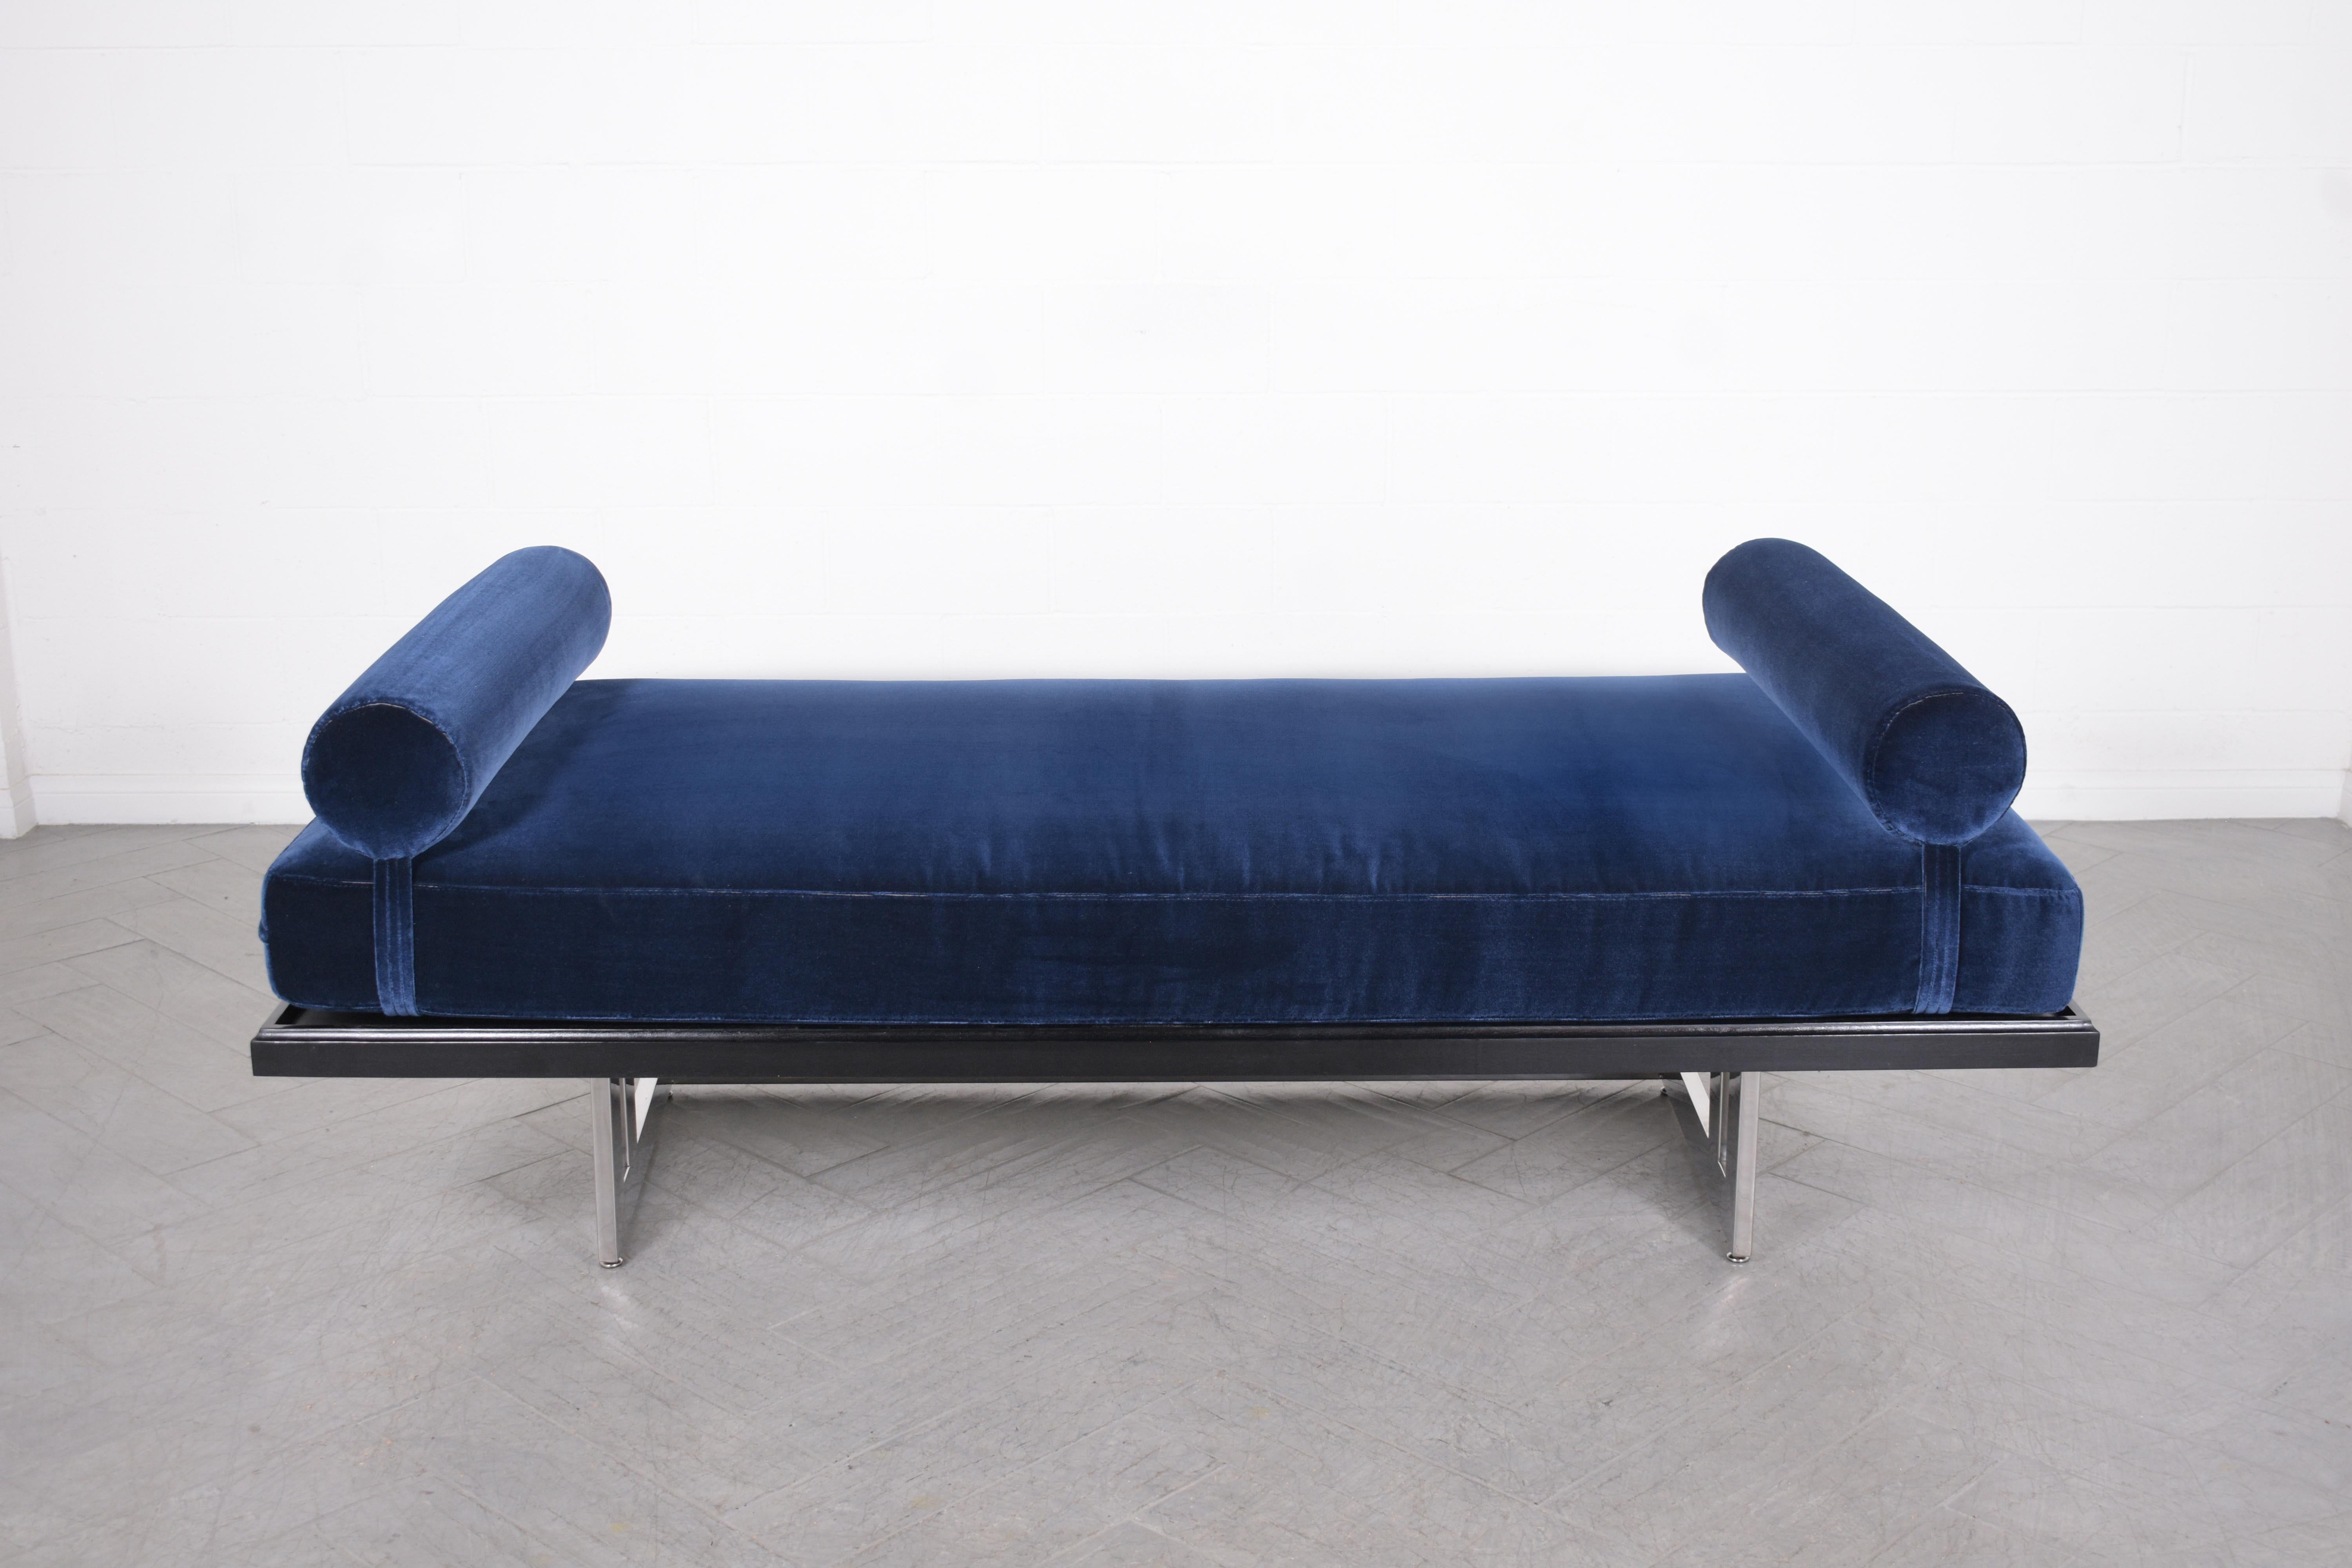 Lacquered Restored Mid-Century Modern Daybed in Navy Blue Velvet with Chrome Steel Base For Sale